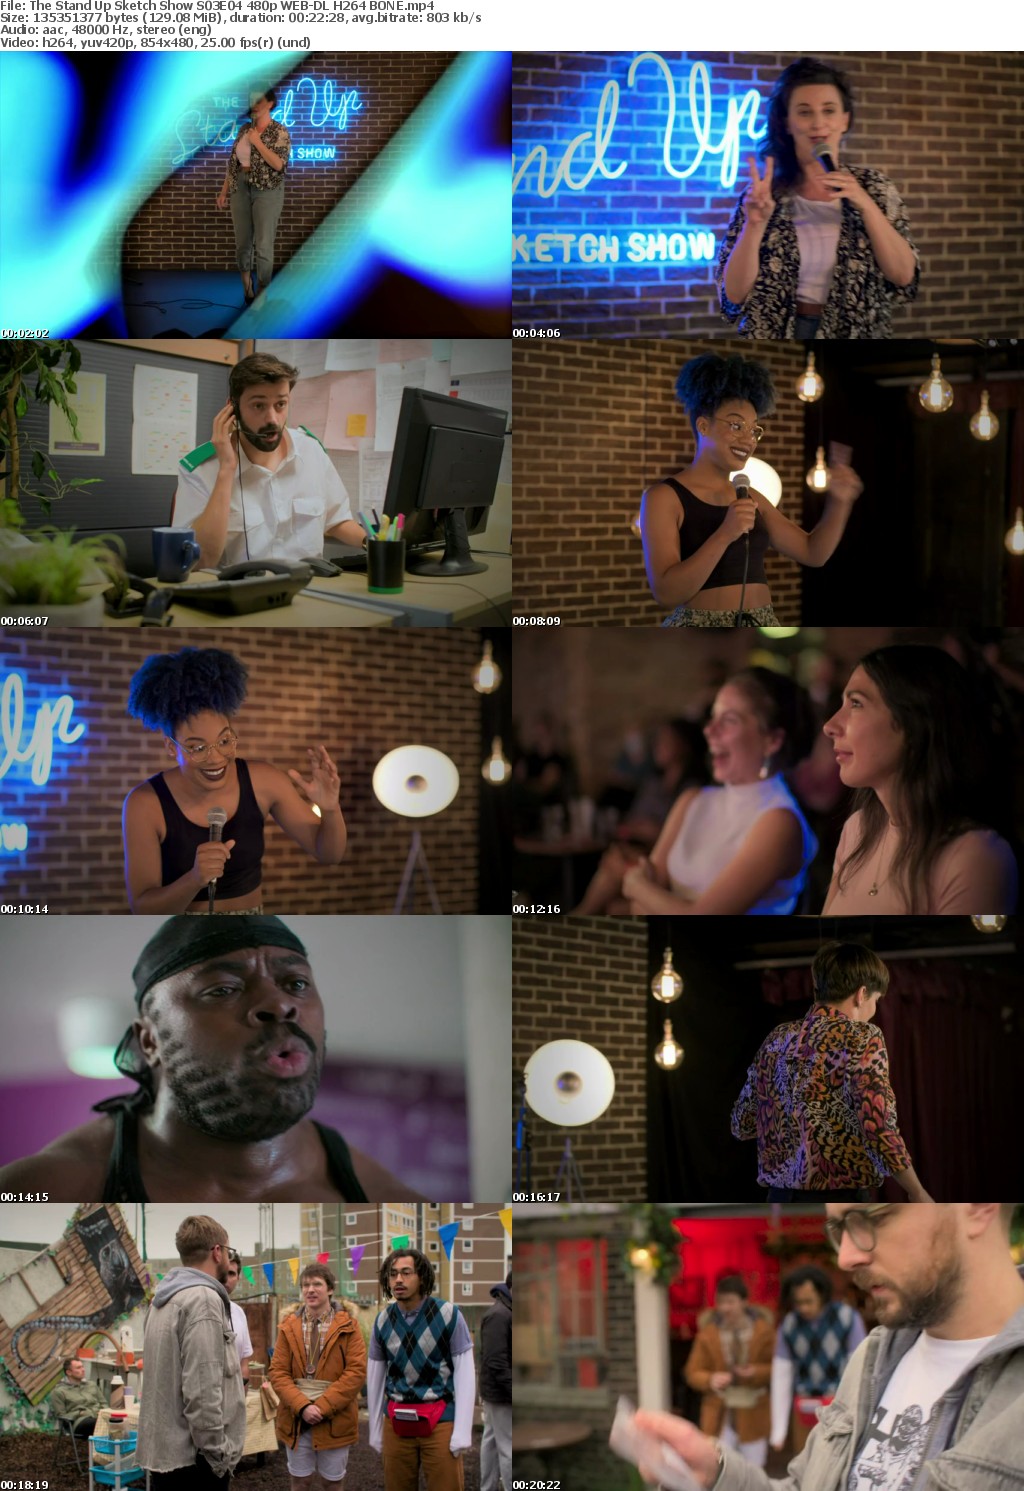 The Stand Up Sketch Show S01-S03 2019-2021 480p WEB-DL H264 BONE